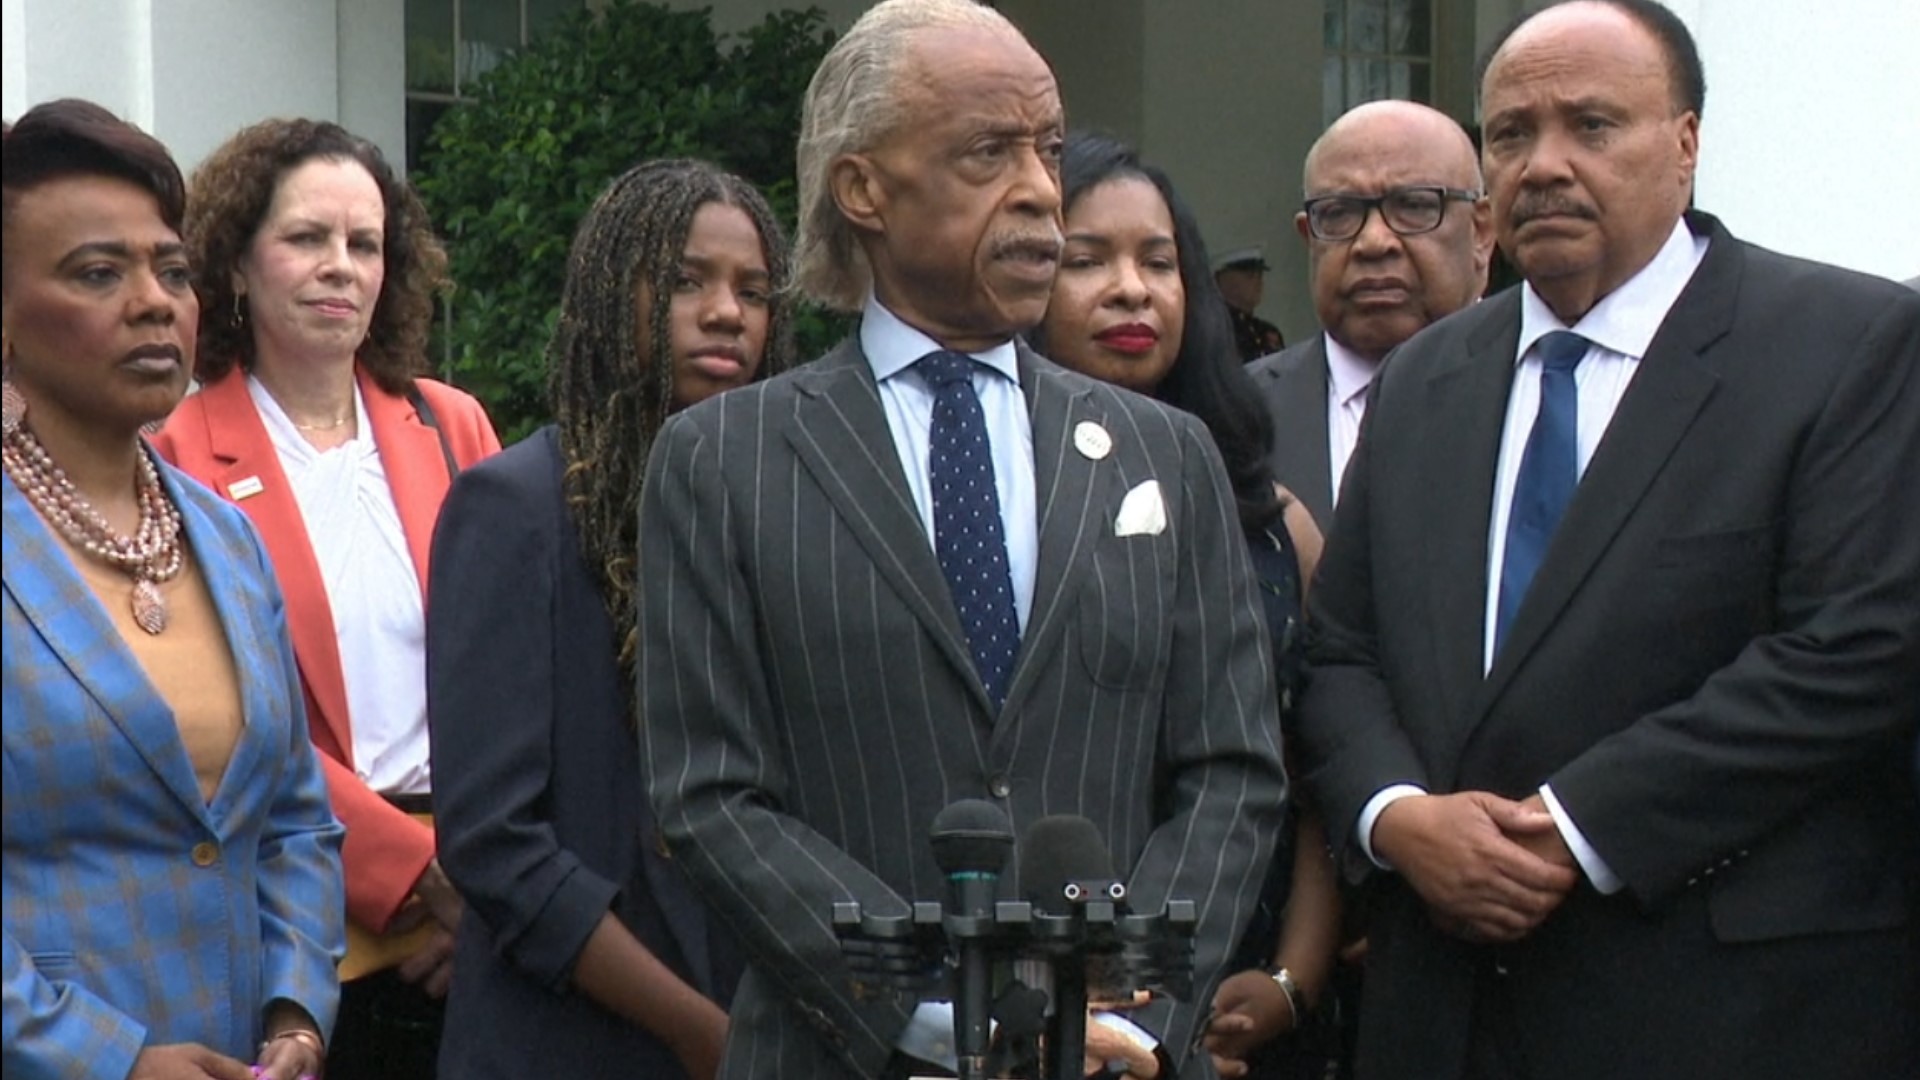 Following a meeting with President Biden on Monday, Rev. Al Sharpton, with members of the King family, said he wants Jacksonville to host the next hate crimes summit